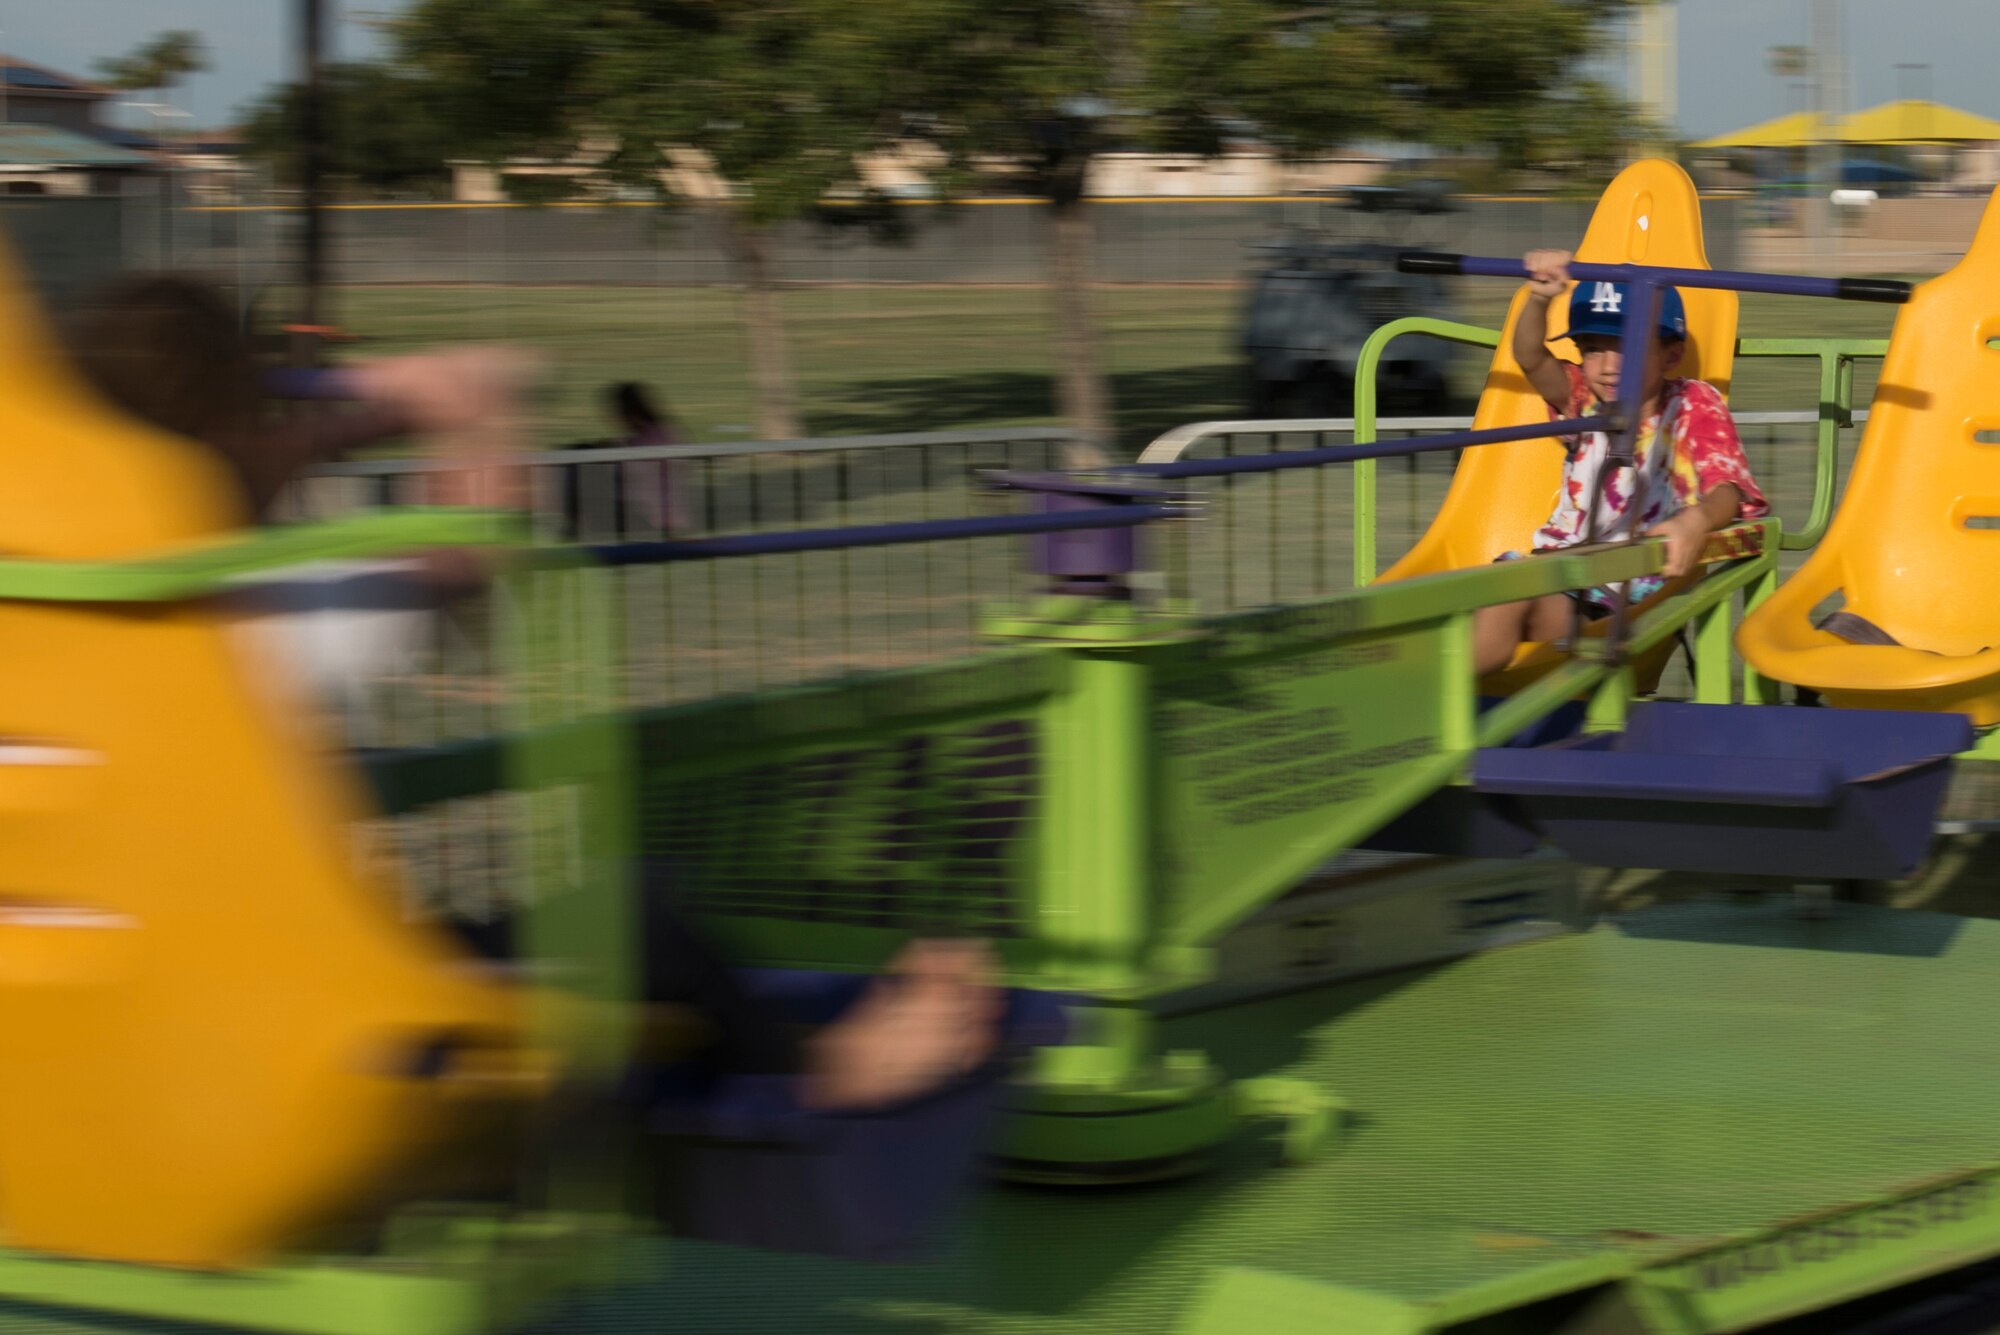 A child holds on tight while on a spinning carnival ride at the Back-To-School Bash July 25, 2018, at Luke Air Force Base, Ariz. The Bash offered families and attendees free food, games, and prize drawings. (U.S. Air Force photo by Senior Airman Ridge Shan)